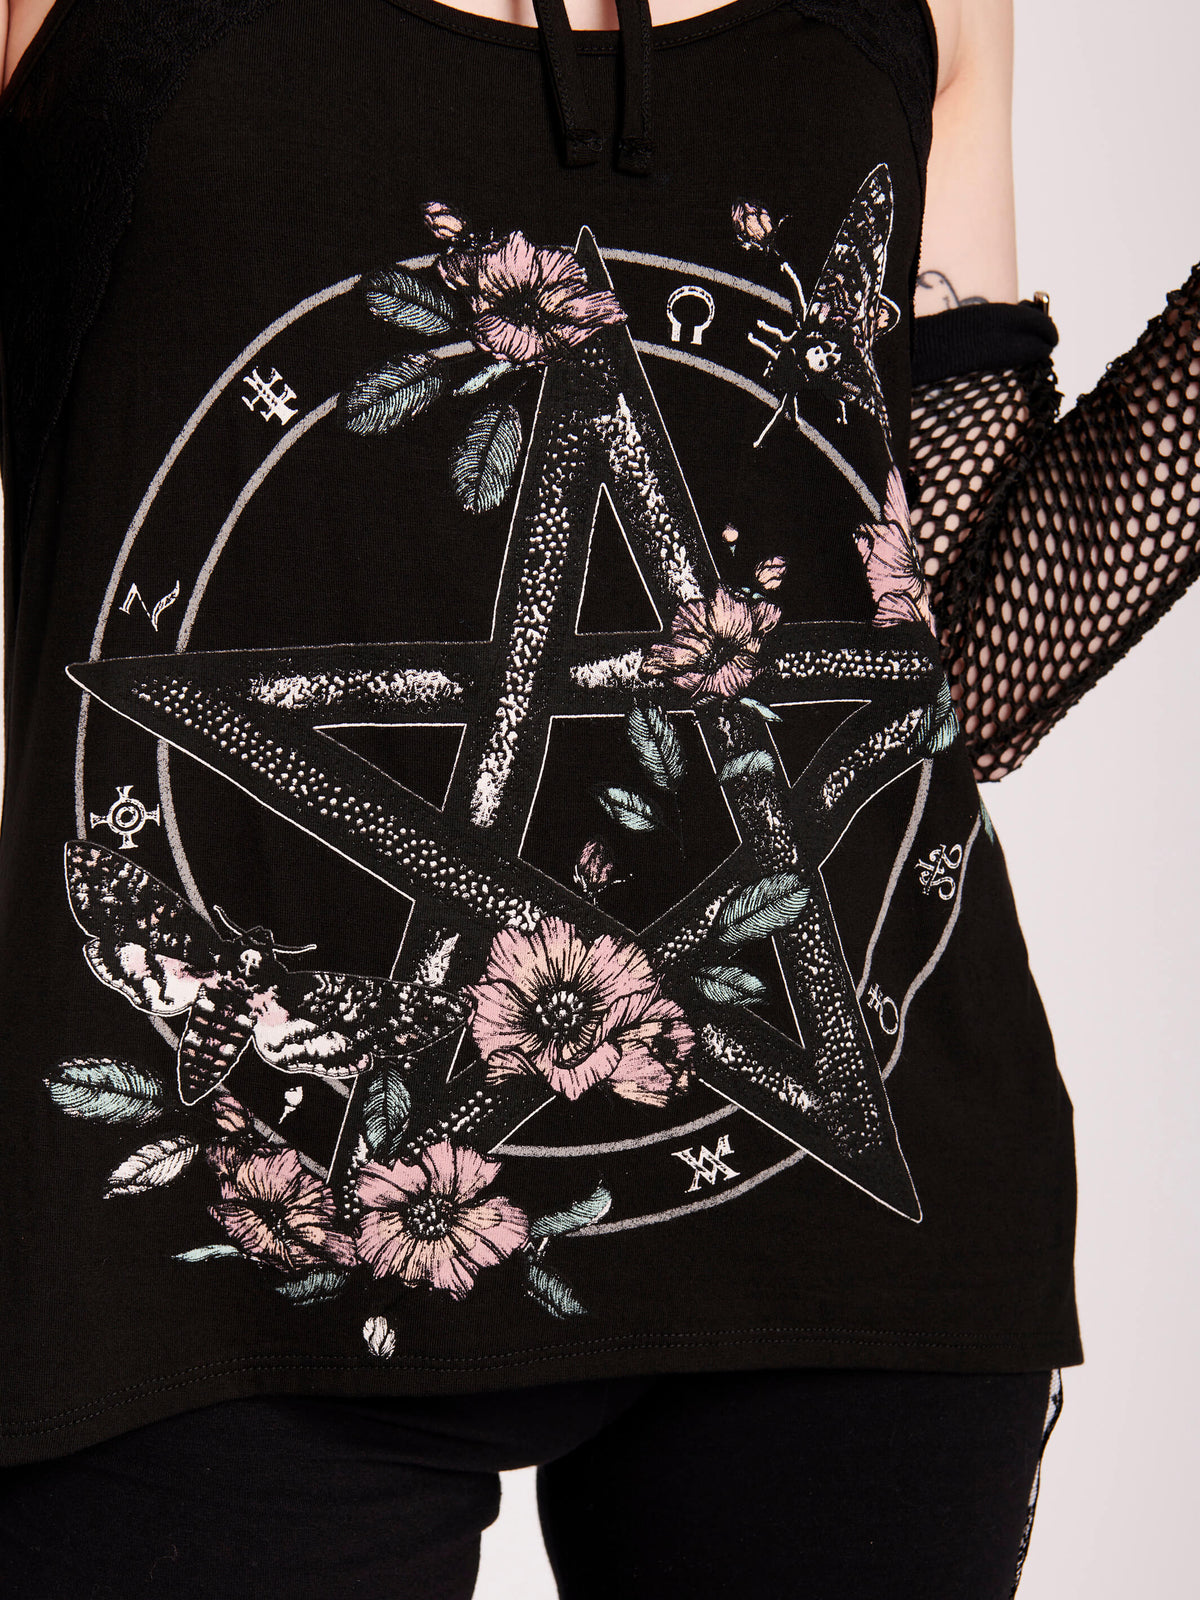 It&#39;s a hot goth girl summer in our pentacle witchy tank. Pastel floral, moths, and witchy symbols with victorian lace detailing. Black gothic tank top. Stand out from the masses with this beautifully crafted tank with black lace details..